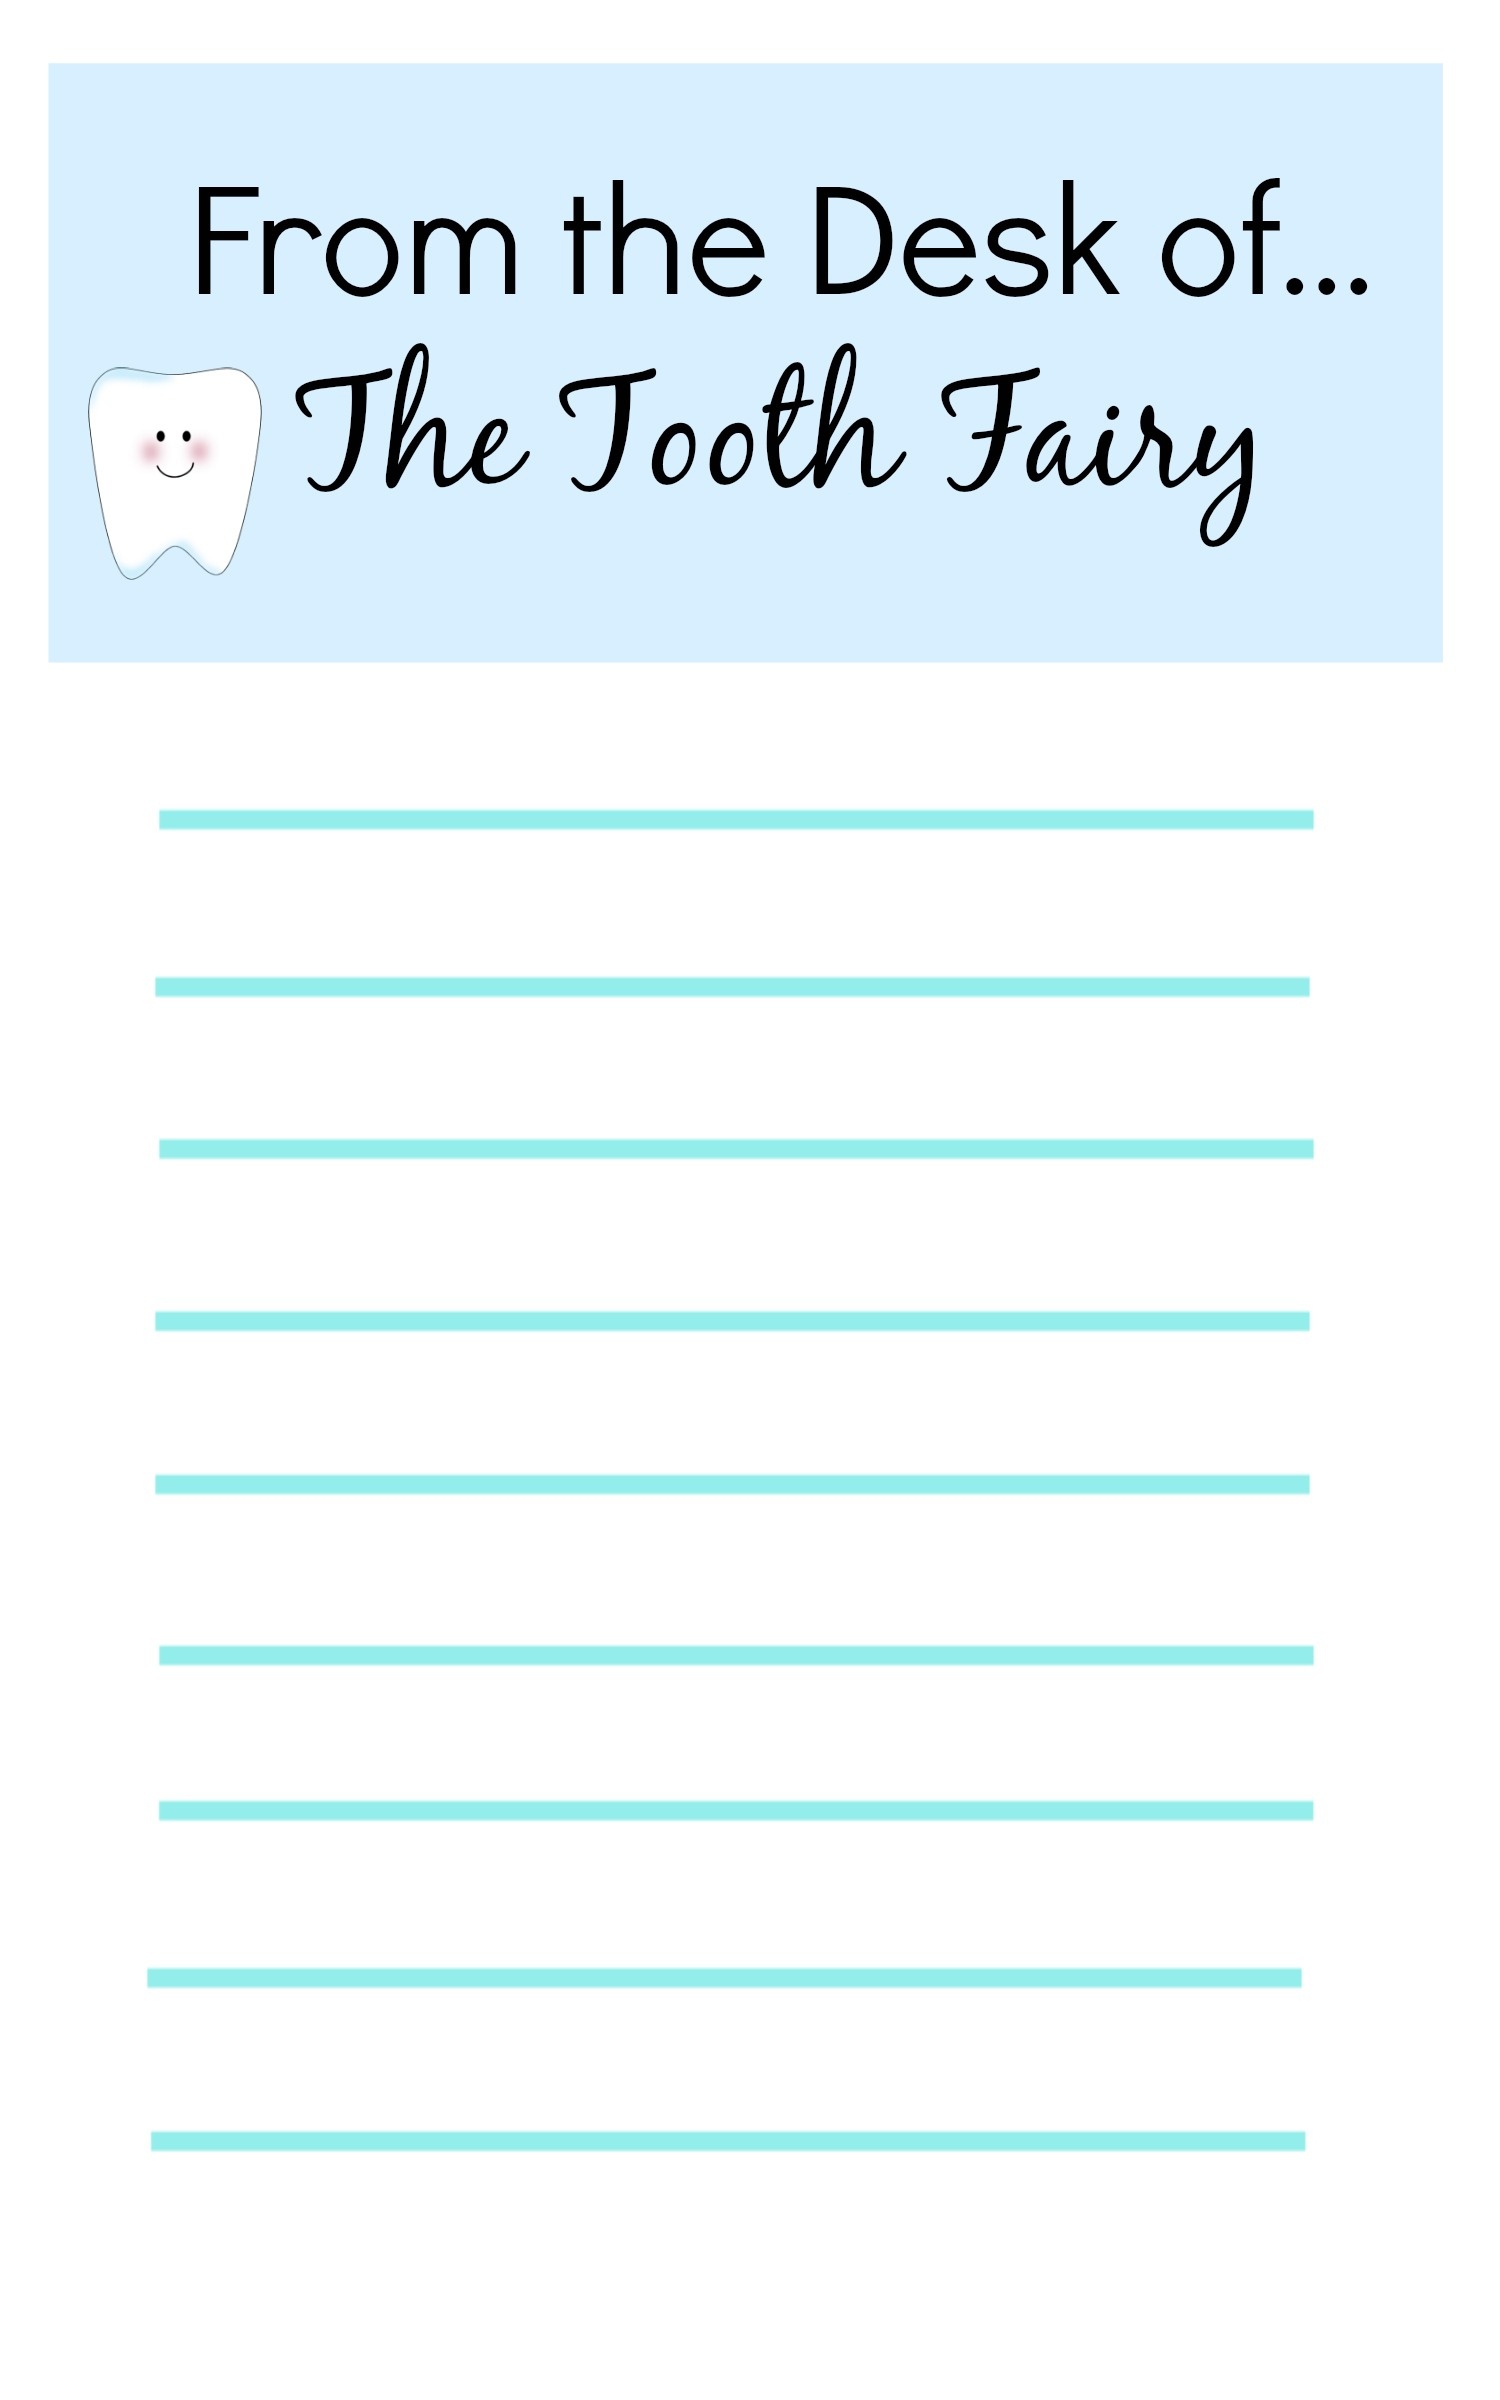 Tooth Fairy Ideas And Free Printables: Tooth Fairy Letterhead Report - Tooth Fairy Stationery Free Printable